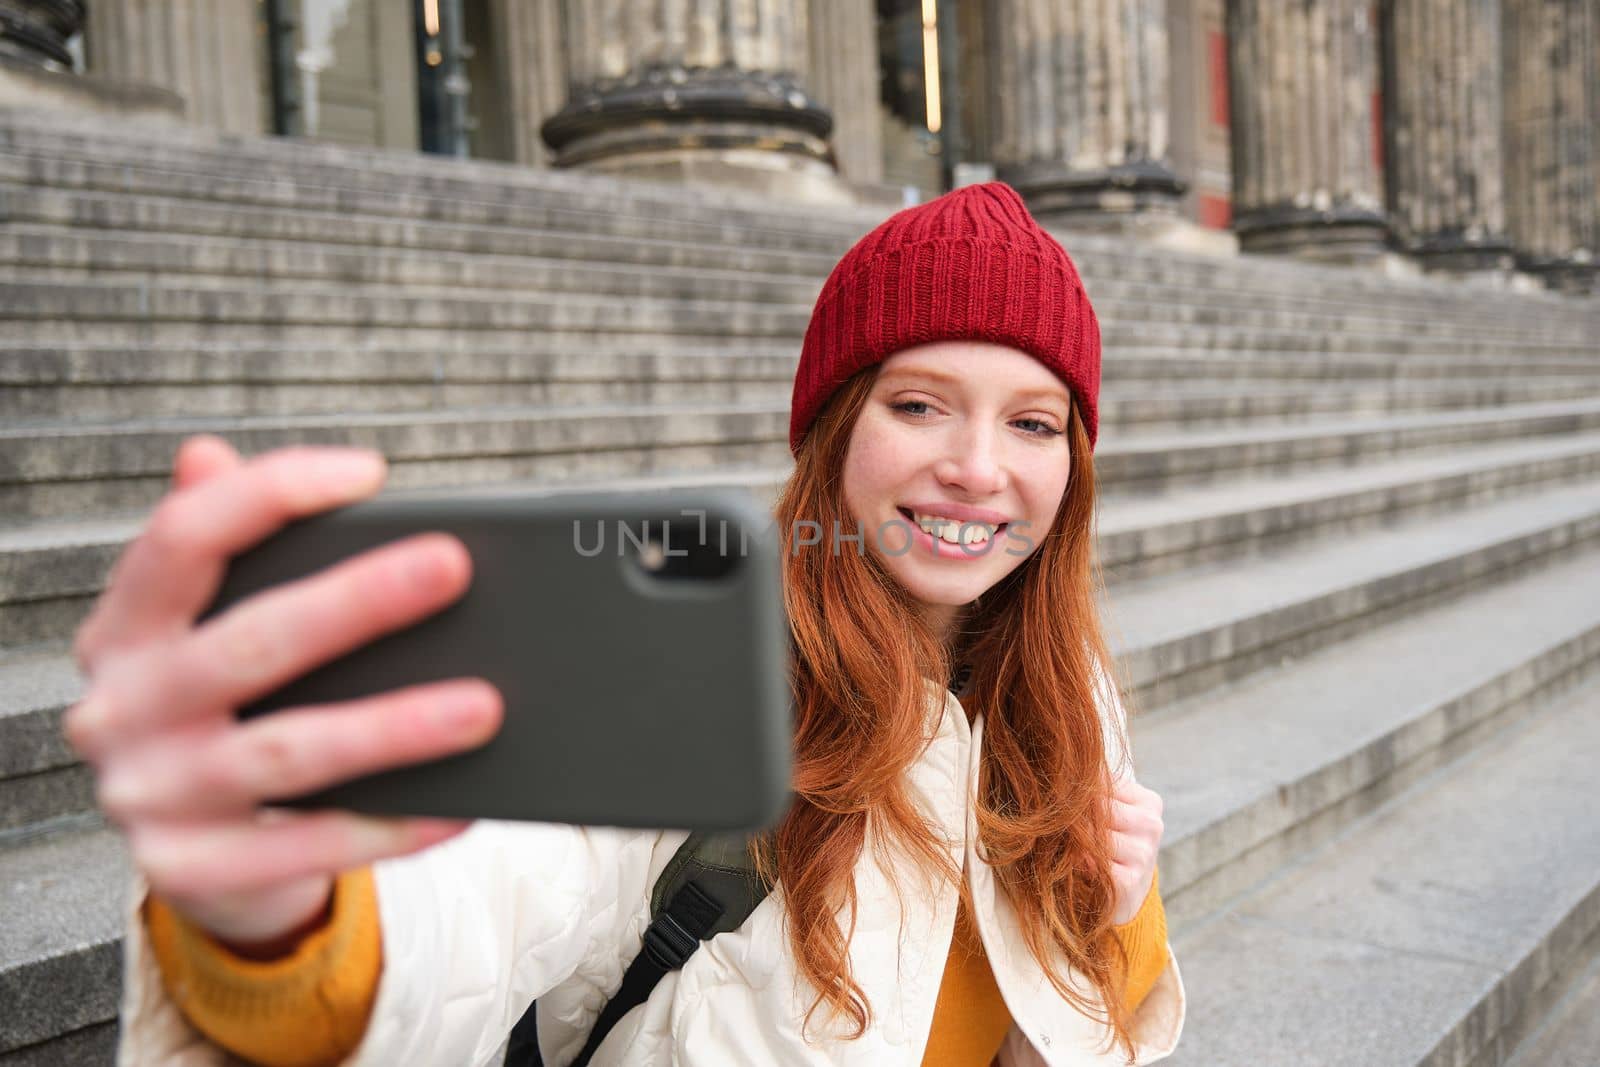 Young redhead tourist takes selfie in front of museum on stairs, holds smartphone and looks at mobile camera, makes photo of herself with phone.